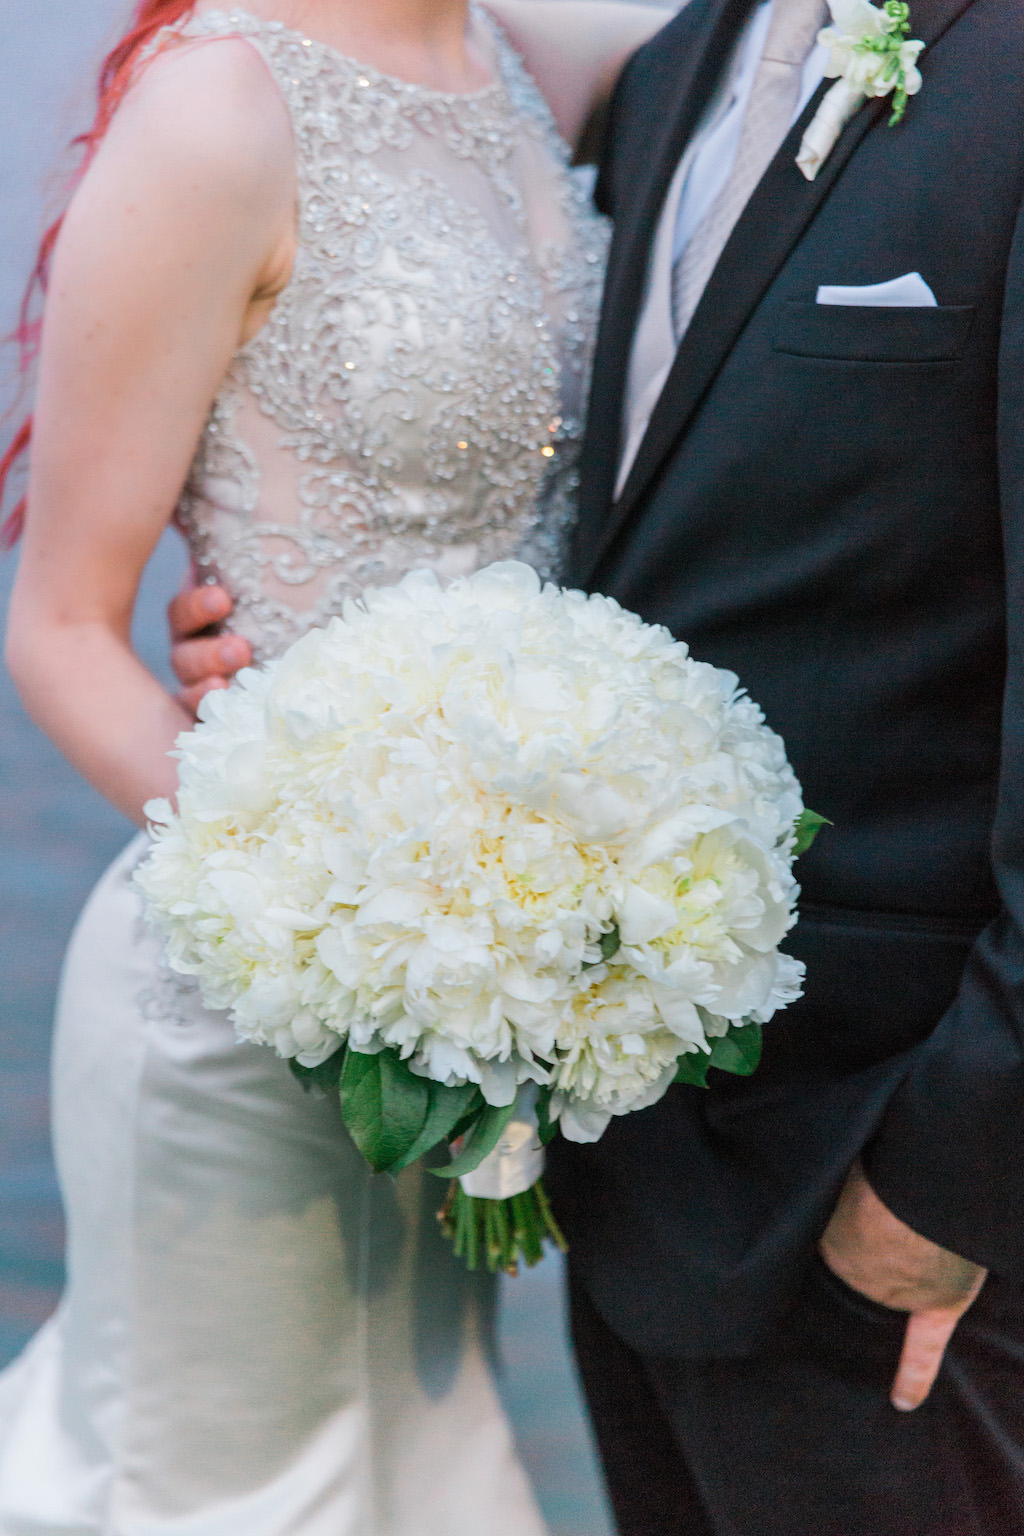 Outdoor Bridal Portrait with Elegant Simple Bouquet of White Peonies with Greenery | Tampa Bay Wedding Florist Cotton & Magnolia